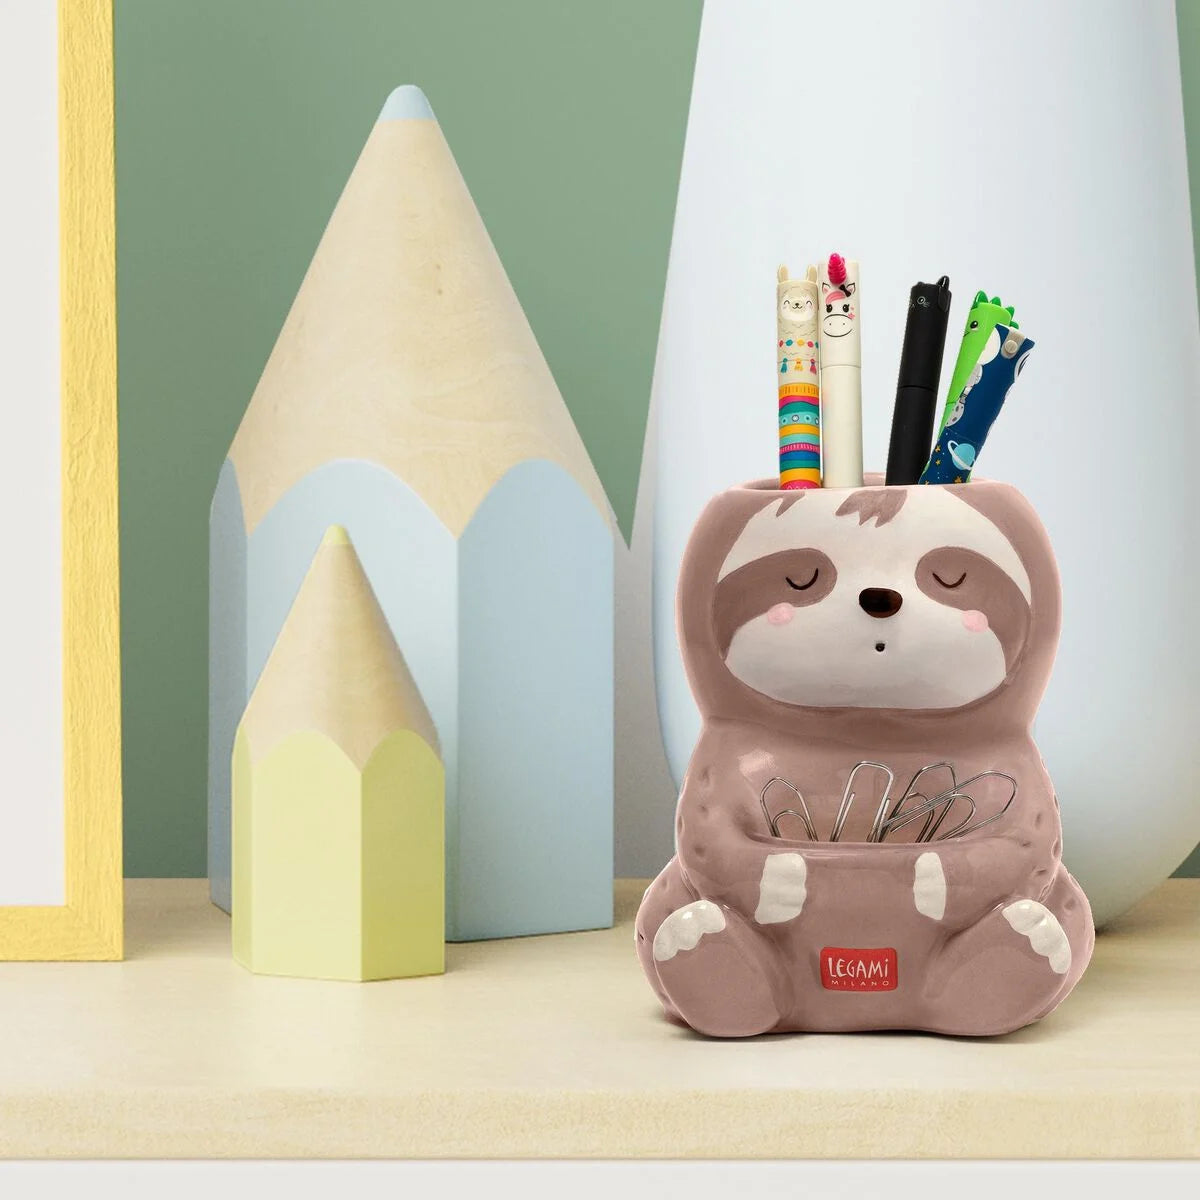 Fab Gifts | Legami Ceramic Pen Holder Sloth by Weirs of Baggot Street